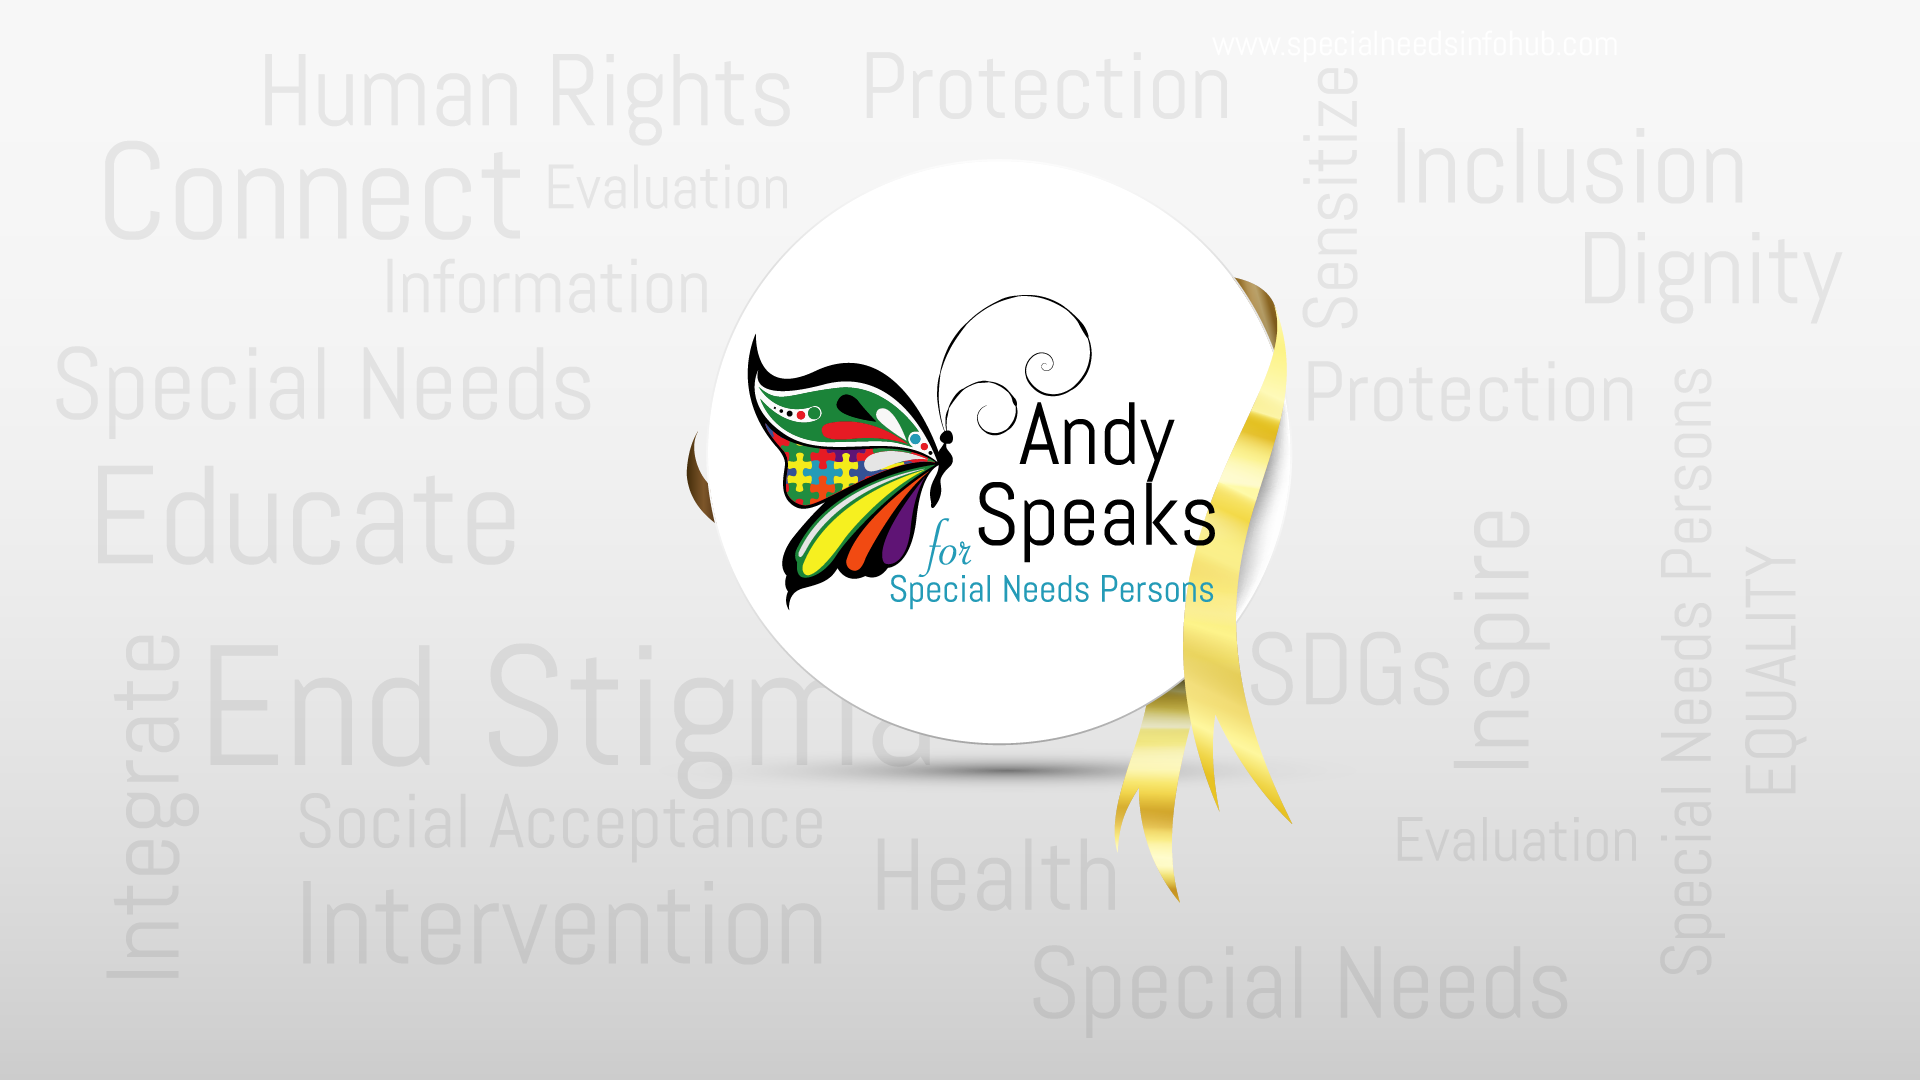 ANDY SPEAKS 4 Special Needs Persons